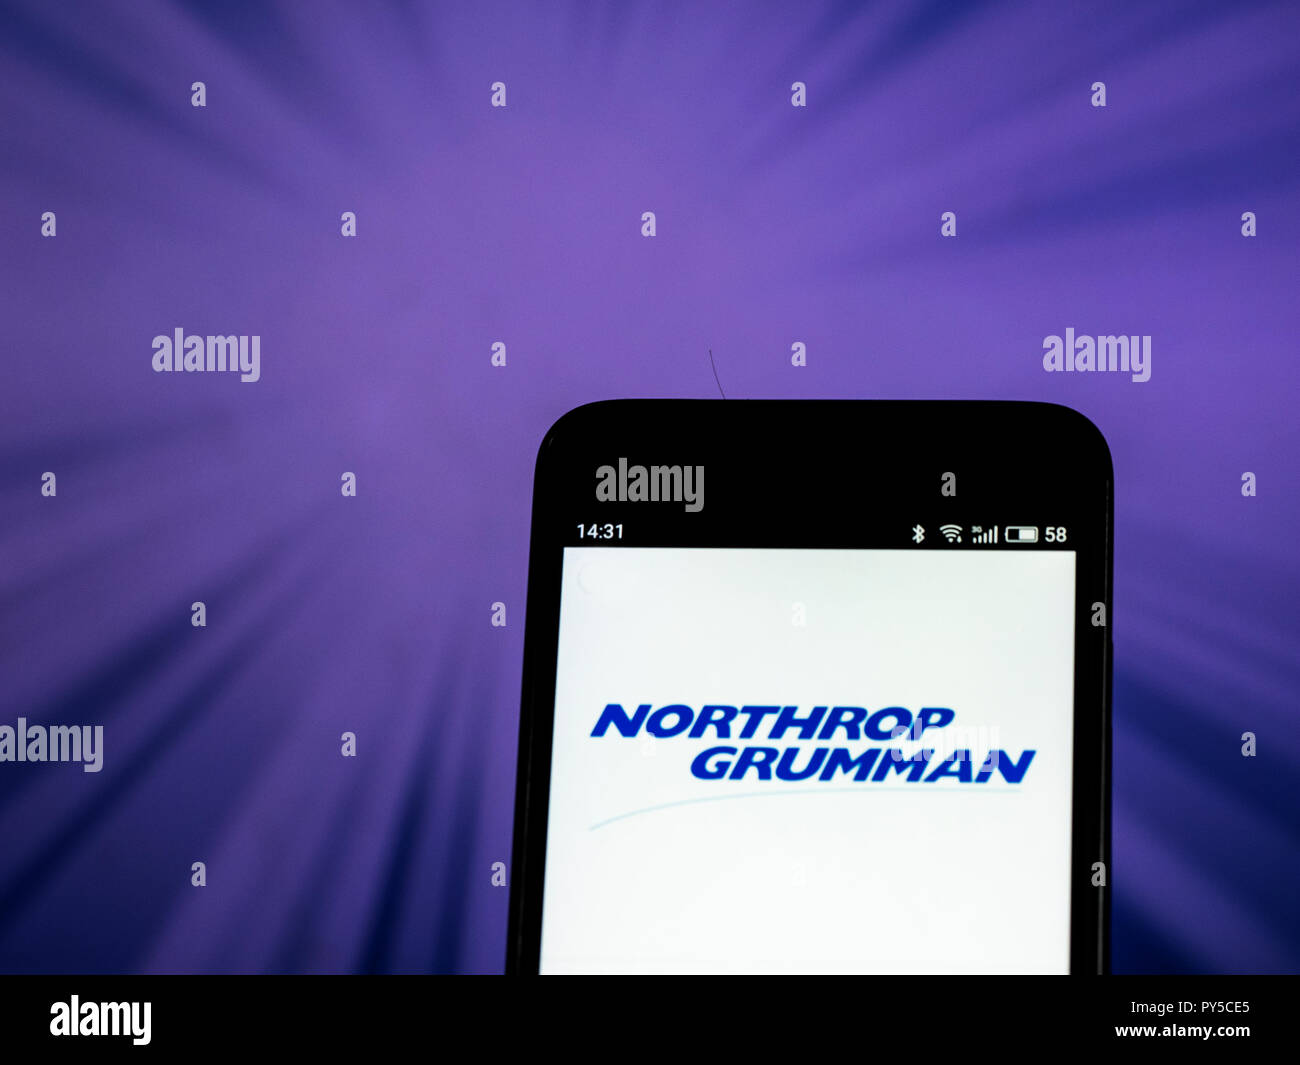 Northrop Grumman Aerospace and defense company logo seen displayed on smart phone. Northrop Grumman Corporation is an American global aerospace and defense technology company formed by Northrop's 1994 purchase of Grumman. The company was the fifth-largest arms trader in the world in 2015. Northrop Grumman employs over 85,000 people worldwide. It reported revenues of $24.508 billion in 2016. Stock Photo